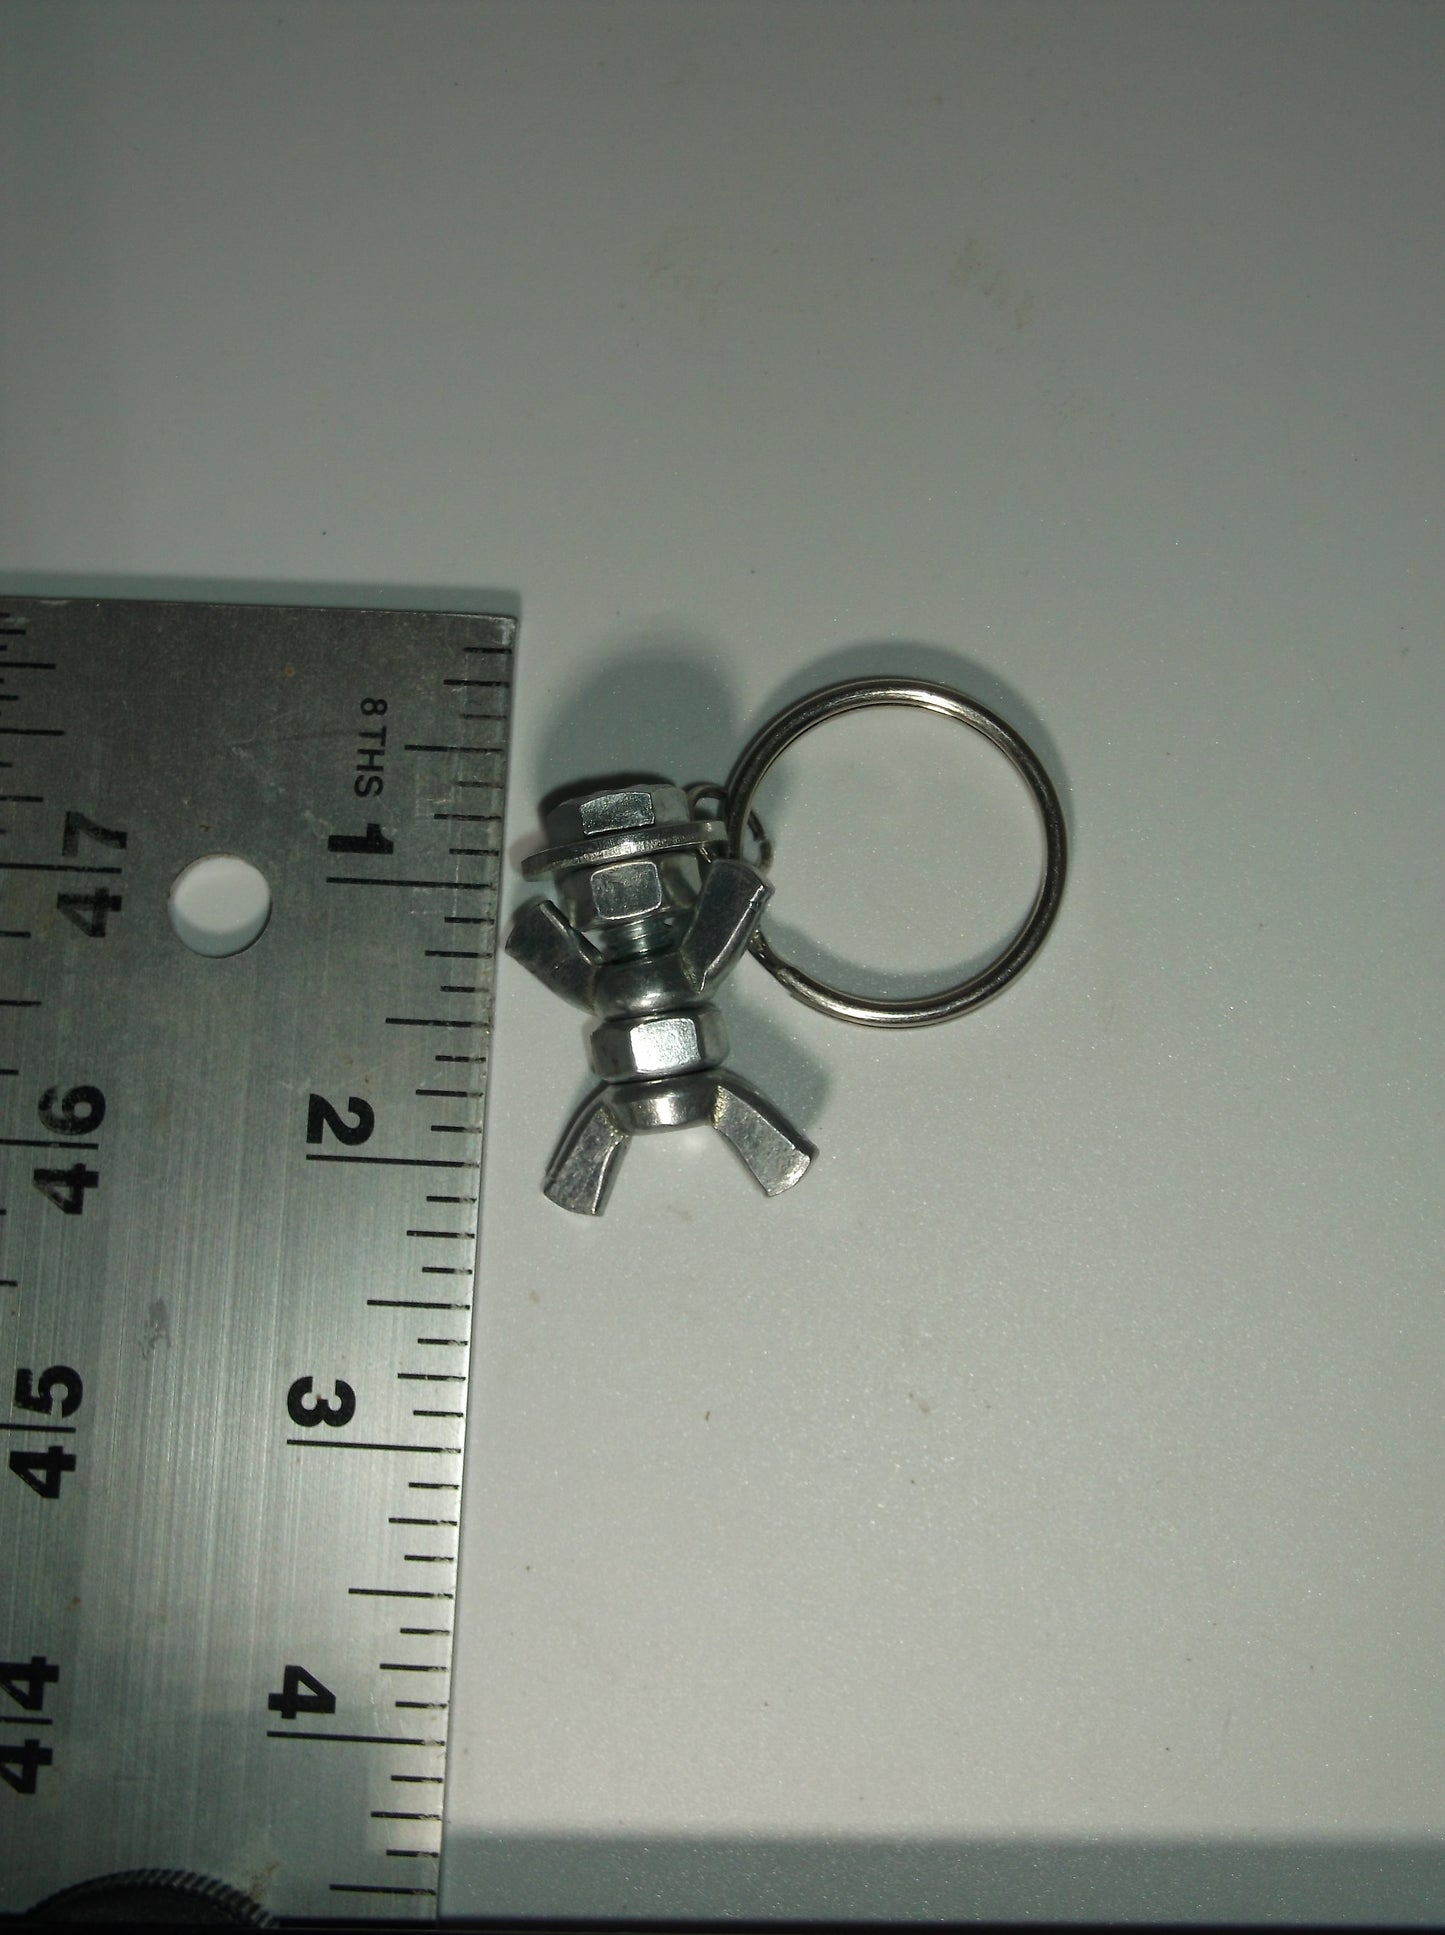 Miniature Man Key Chain, Tiny Person Nut and Bolt Key Chain, Recycled Hardware Key Chain